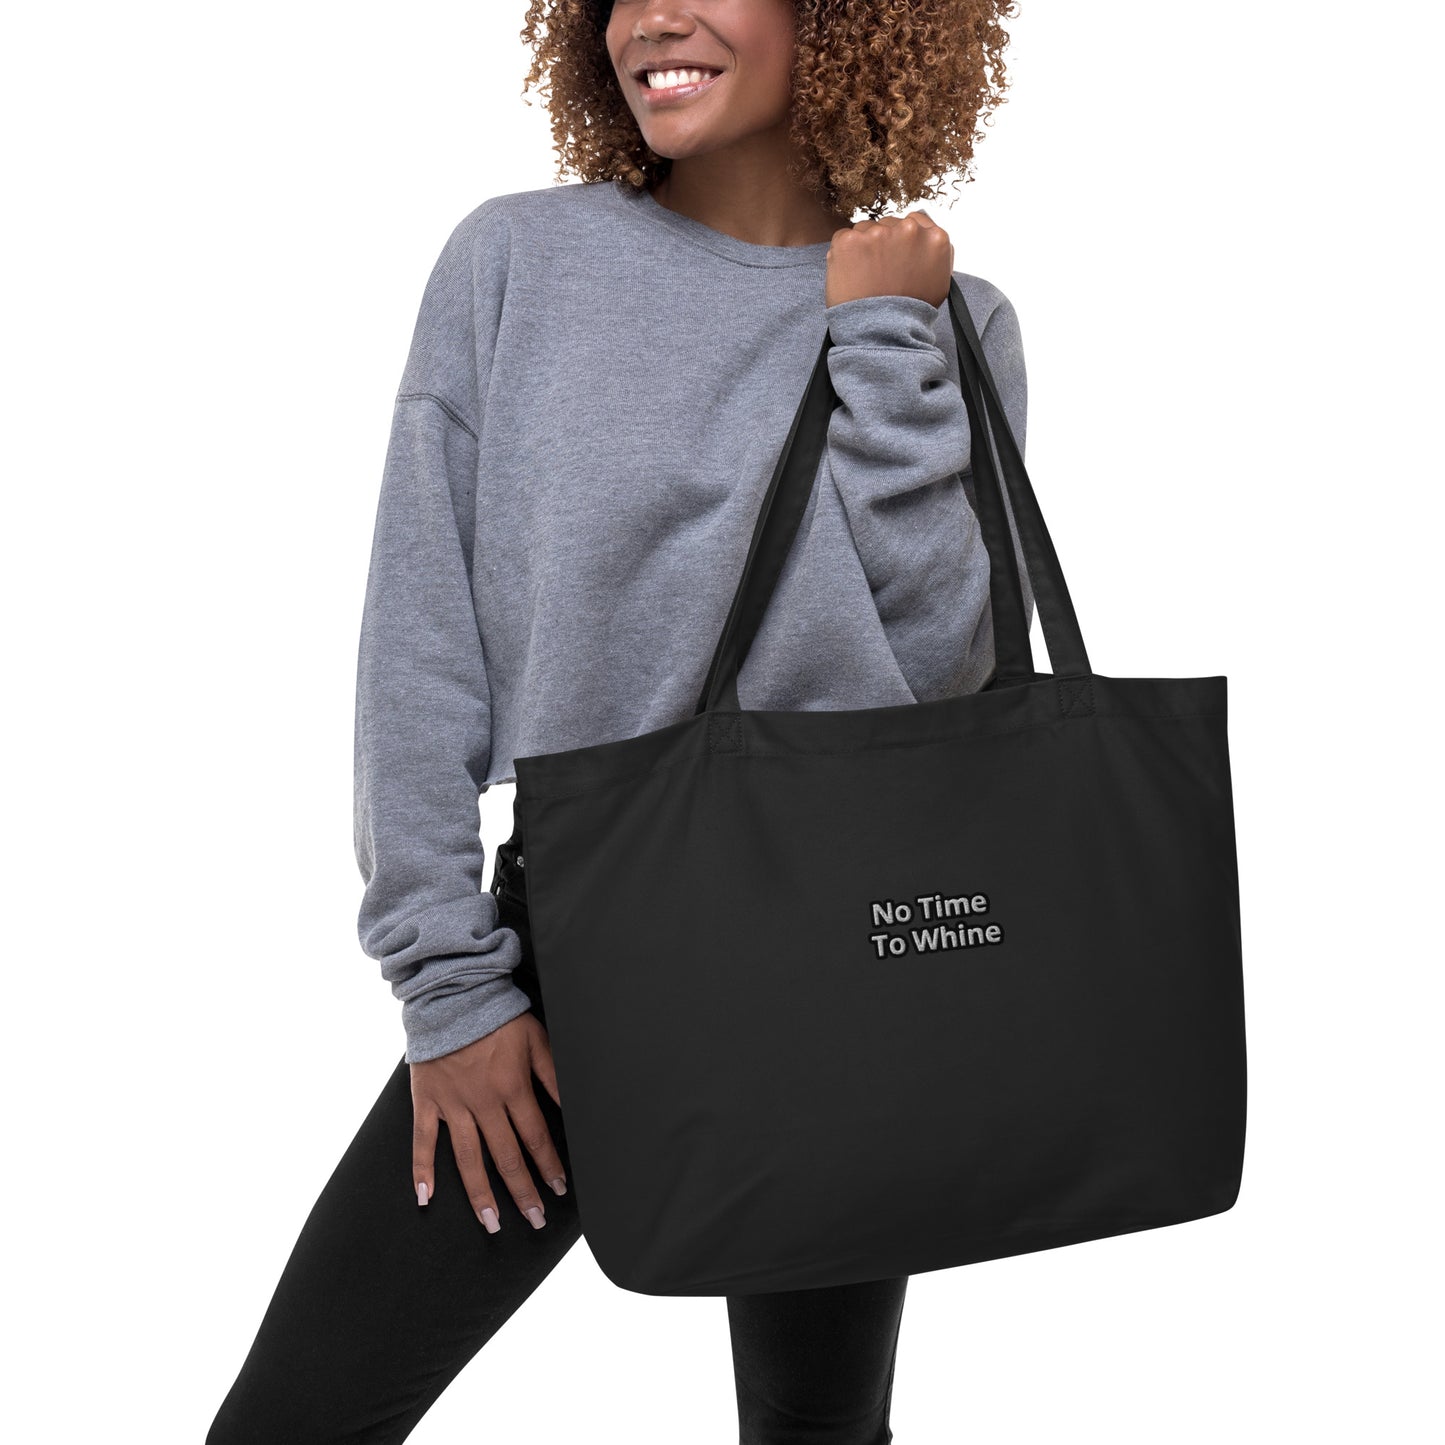 No Time To Whine Large organic tote bag